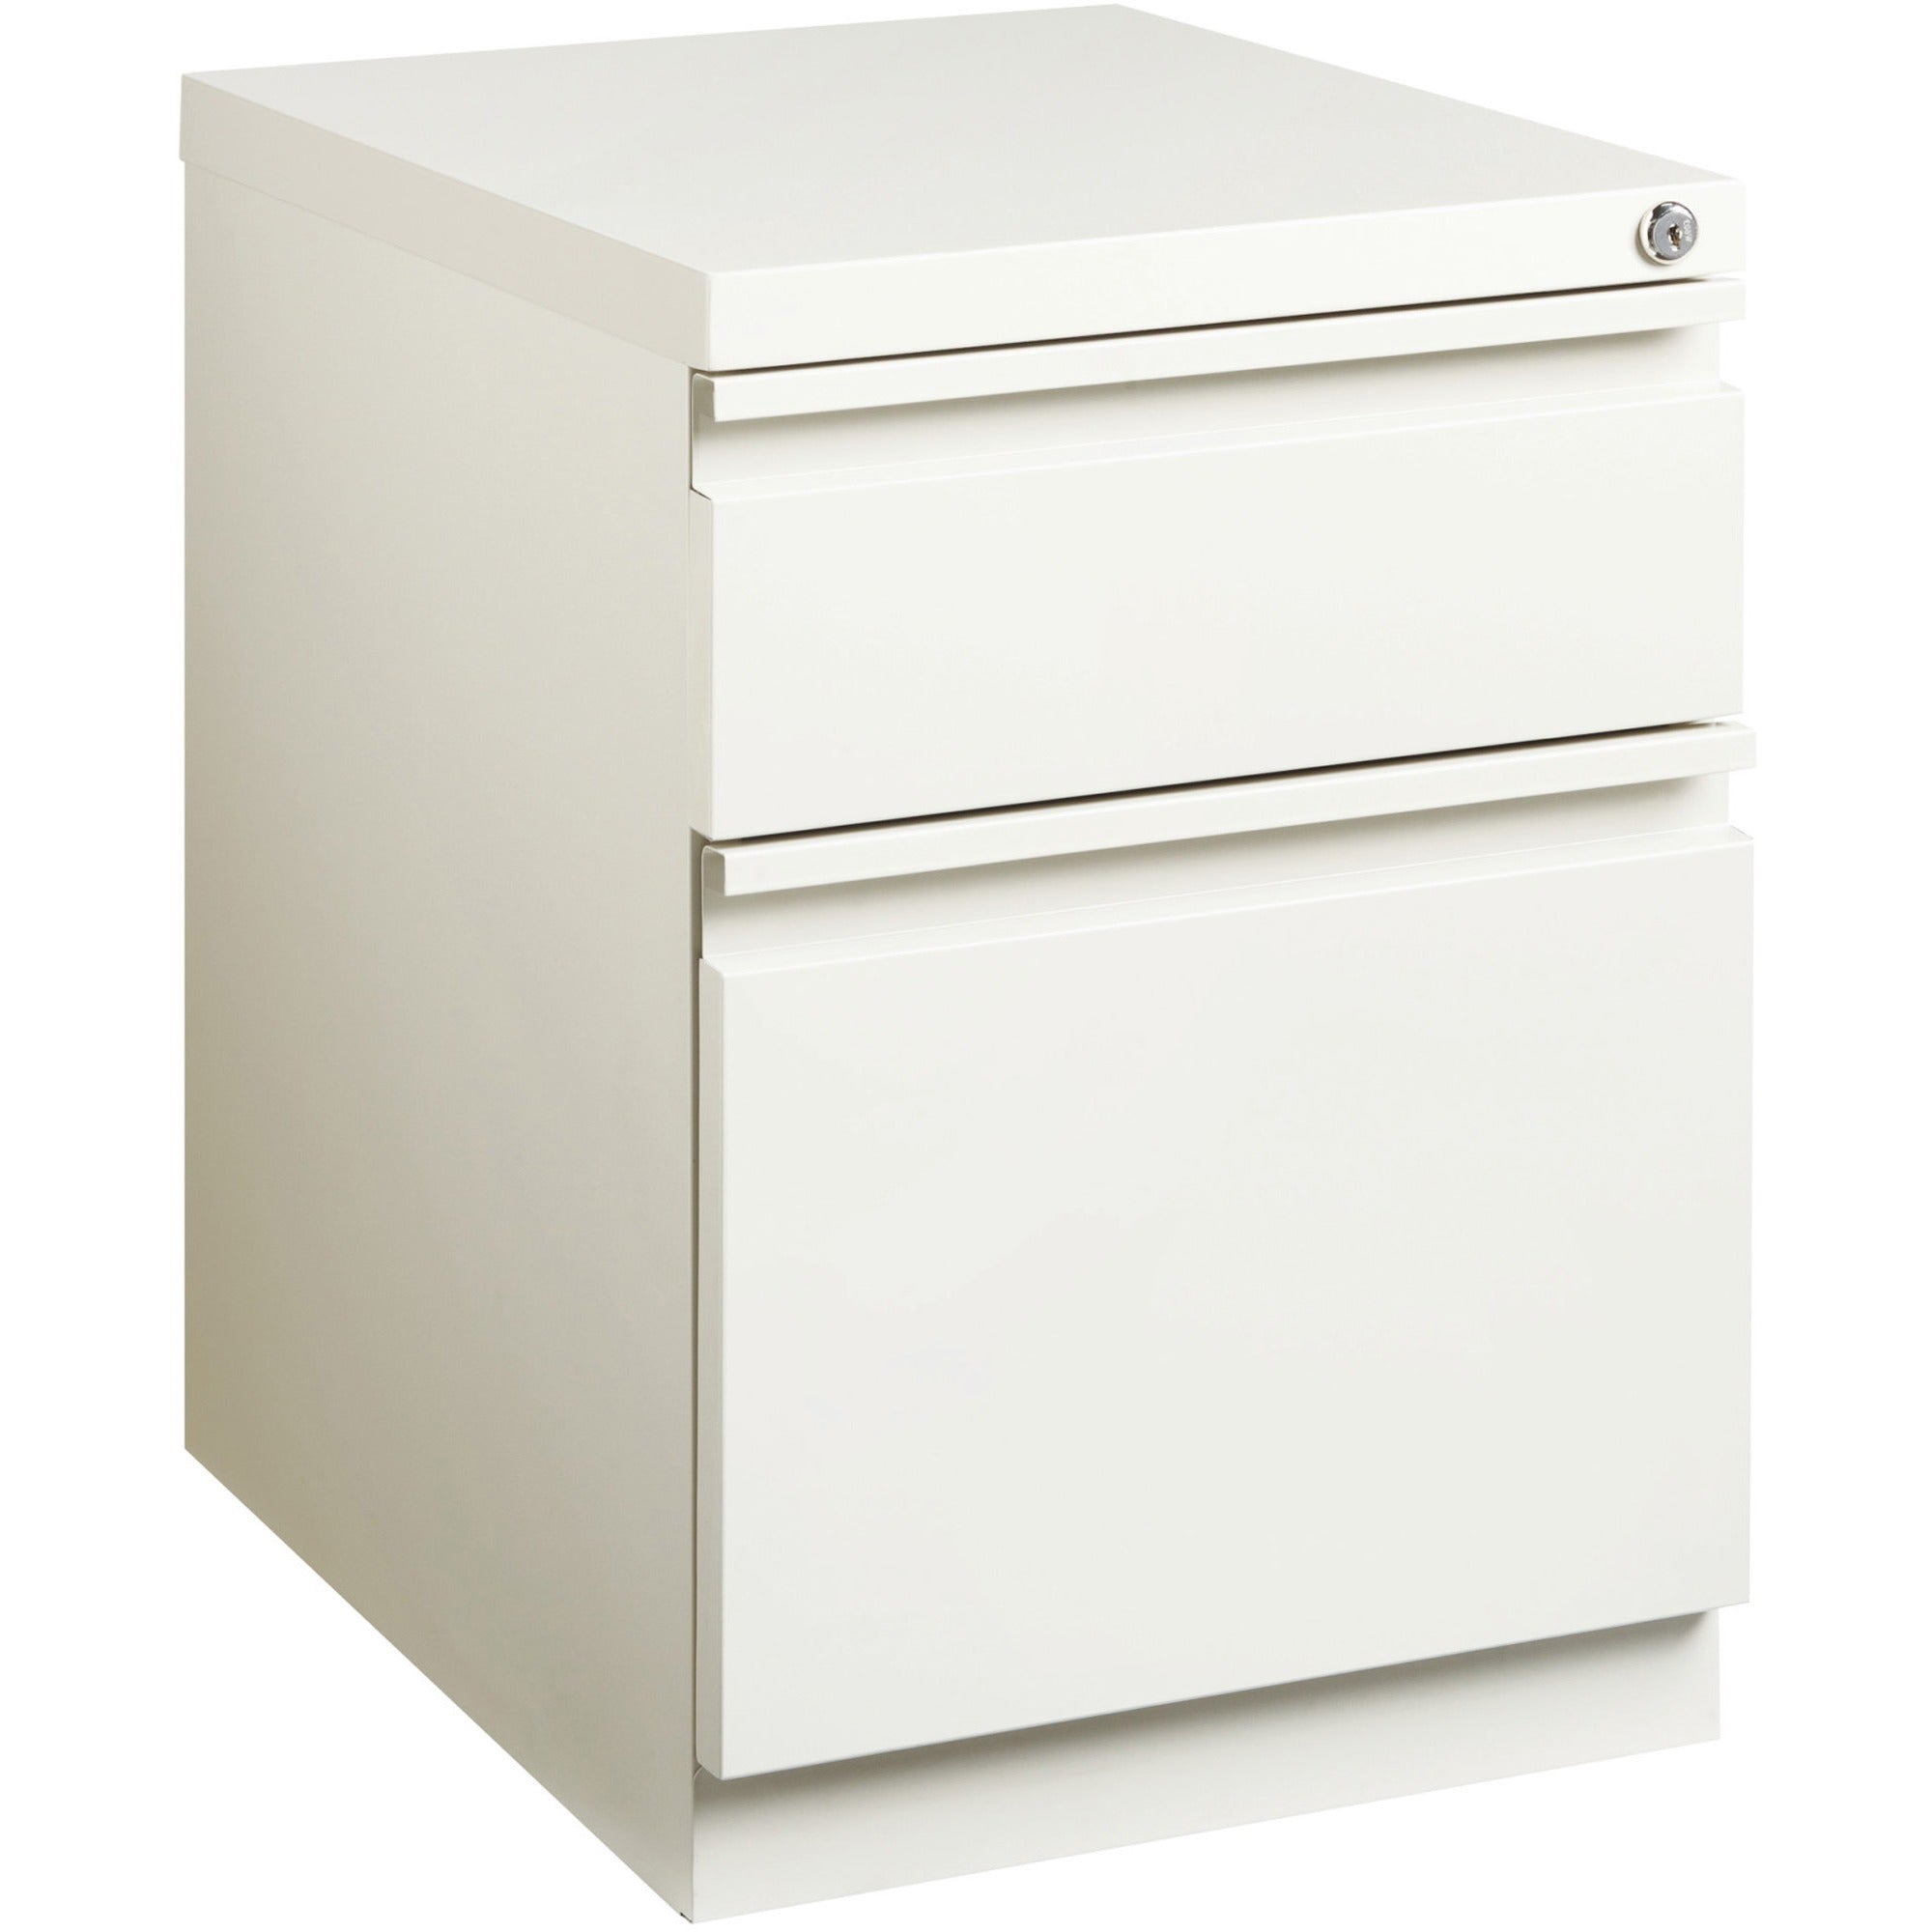 lorell-20-box-file-mobile-pedestal-15-x-199-x-238-for-box-file-letter-mobility-ball-bearing-suspension-removable-lock-pull-out-drawer-recessed-drawer-anti-tip-casters-key-lock-white-steel-recycled_llr00051 - 1